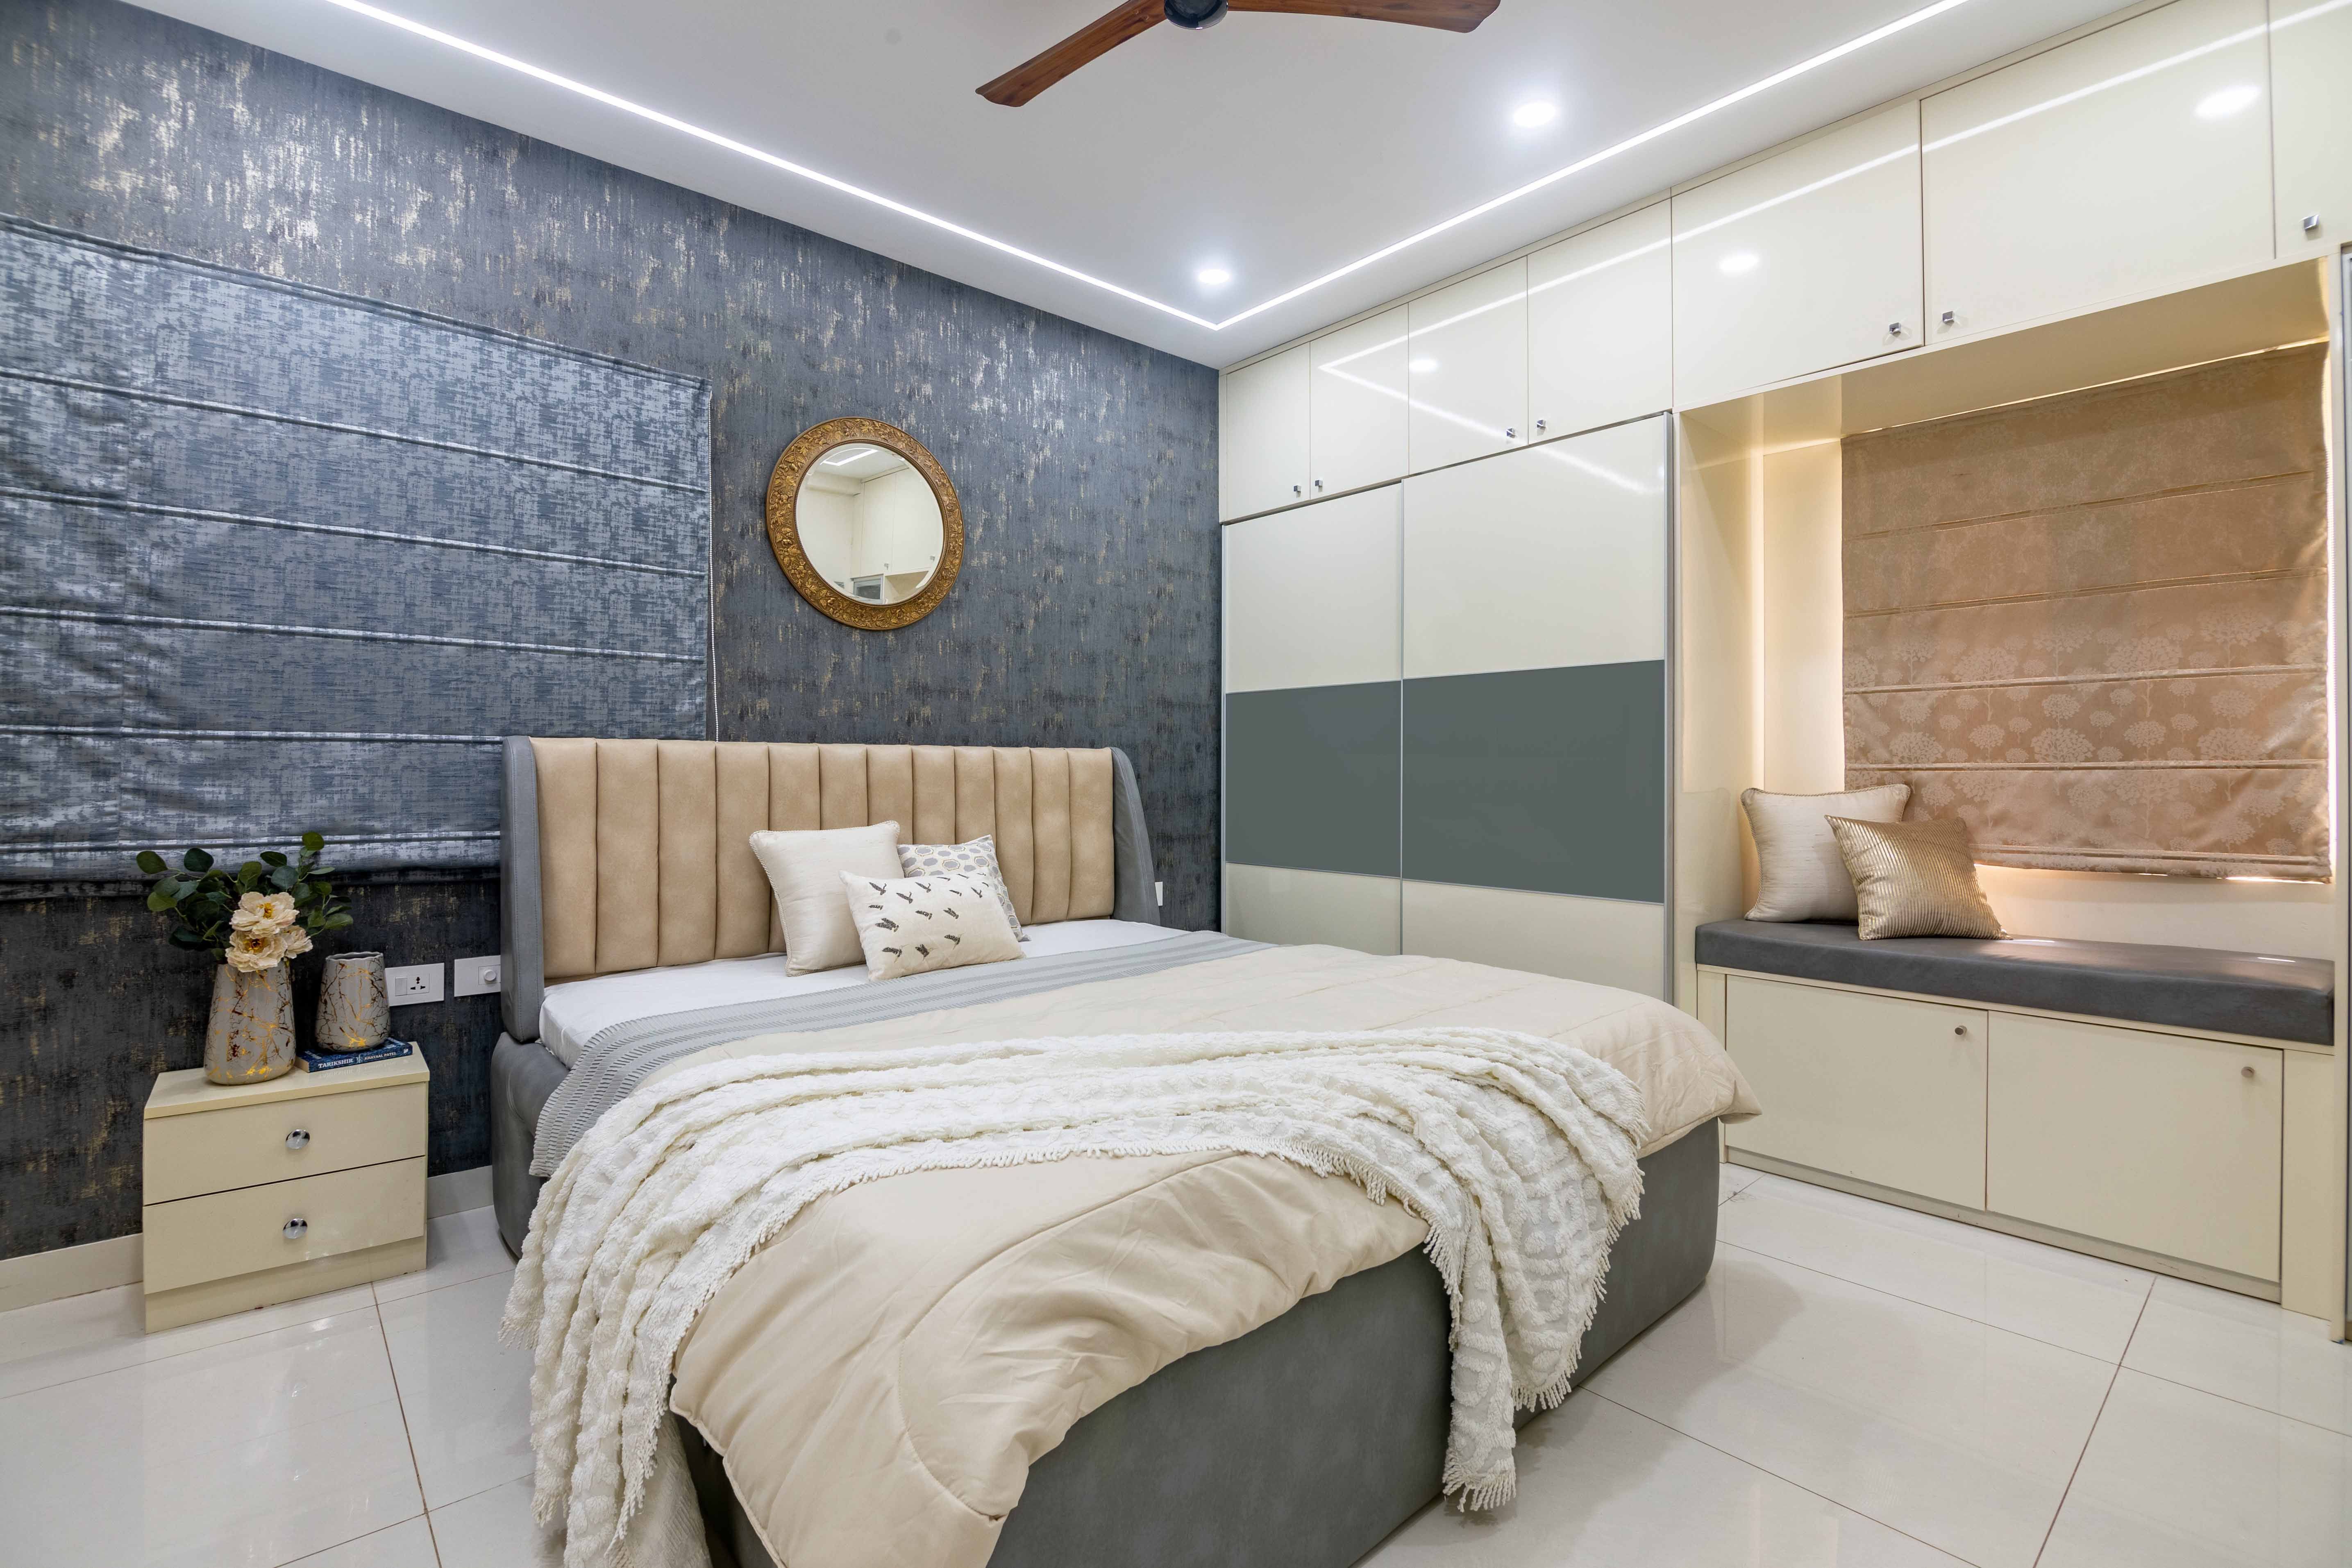 Modern Bedroom Design With Grey And Gold Textured Accent Wall